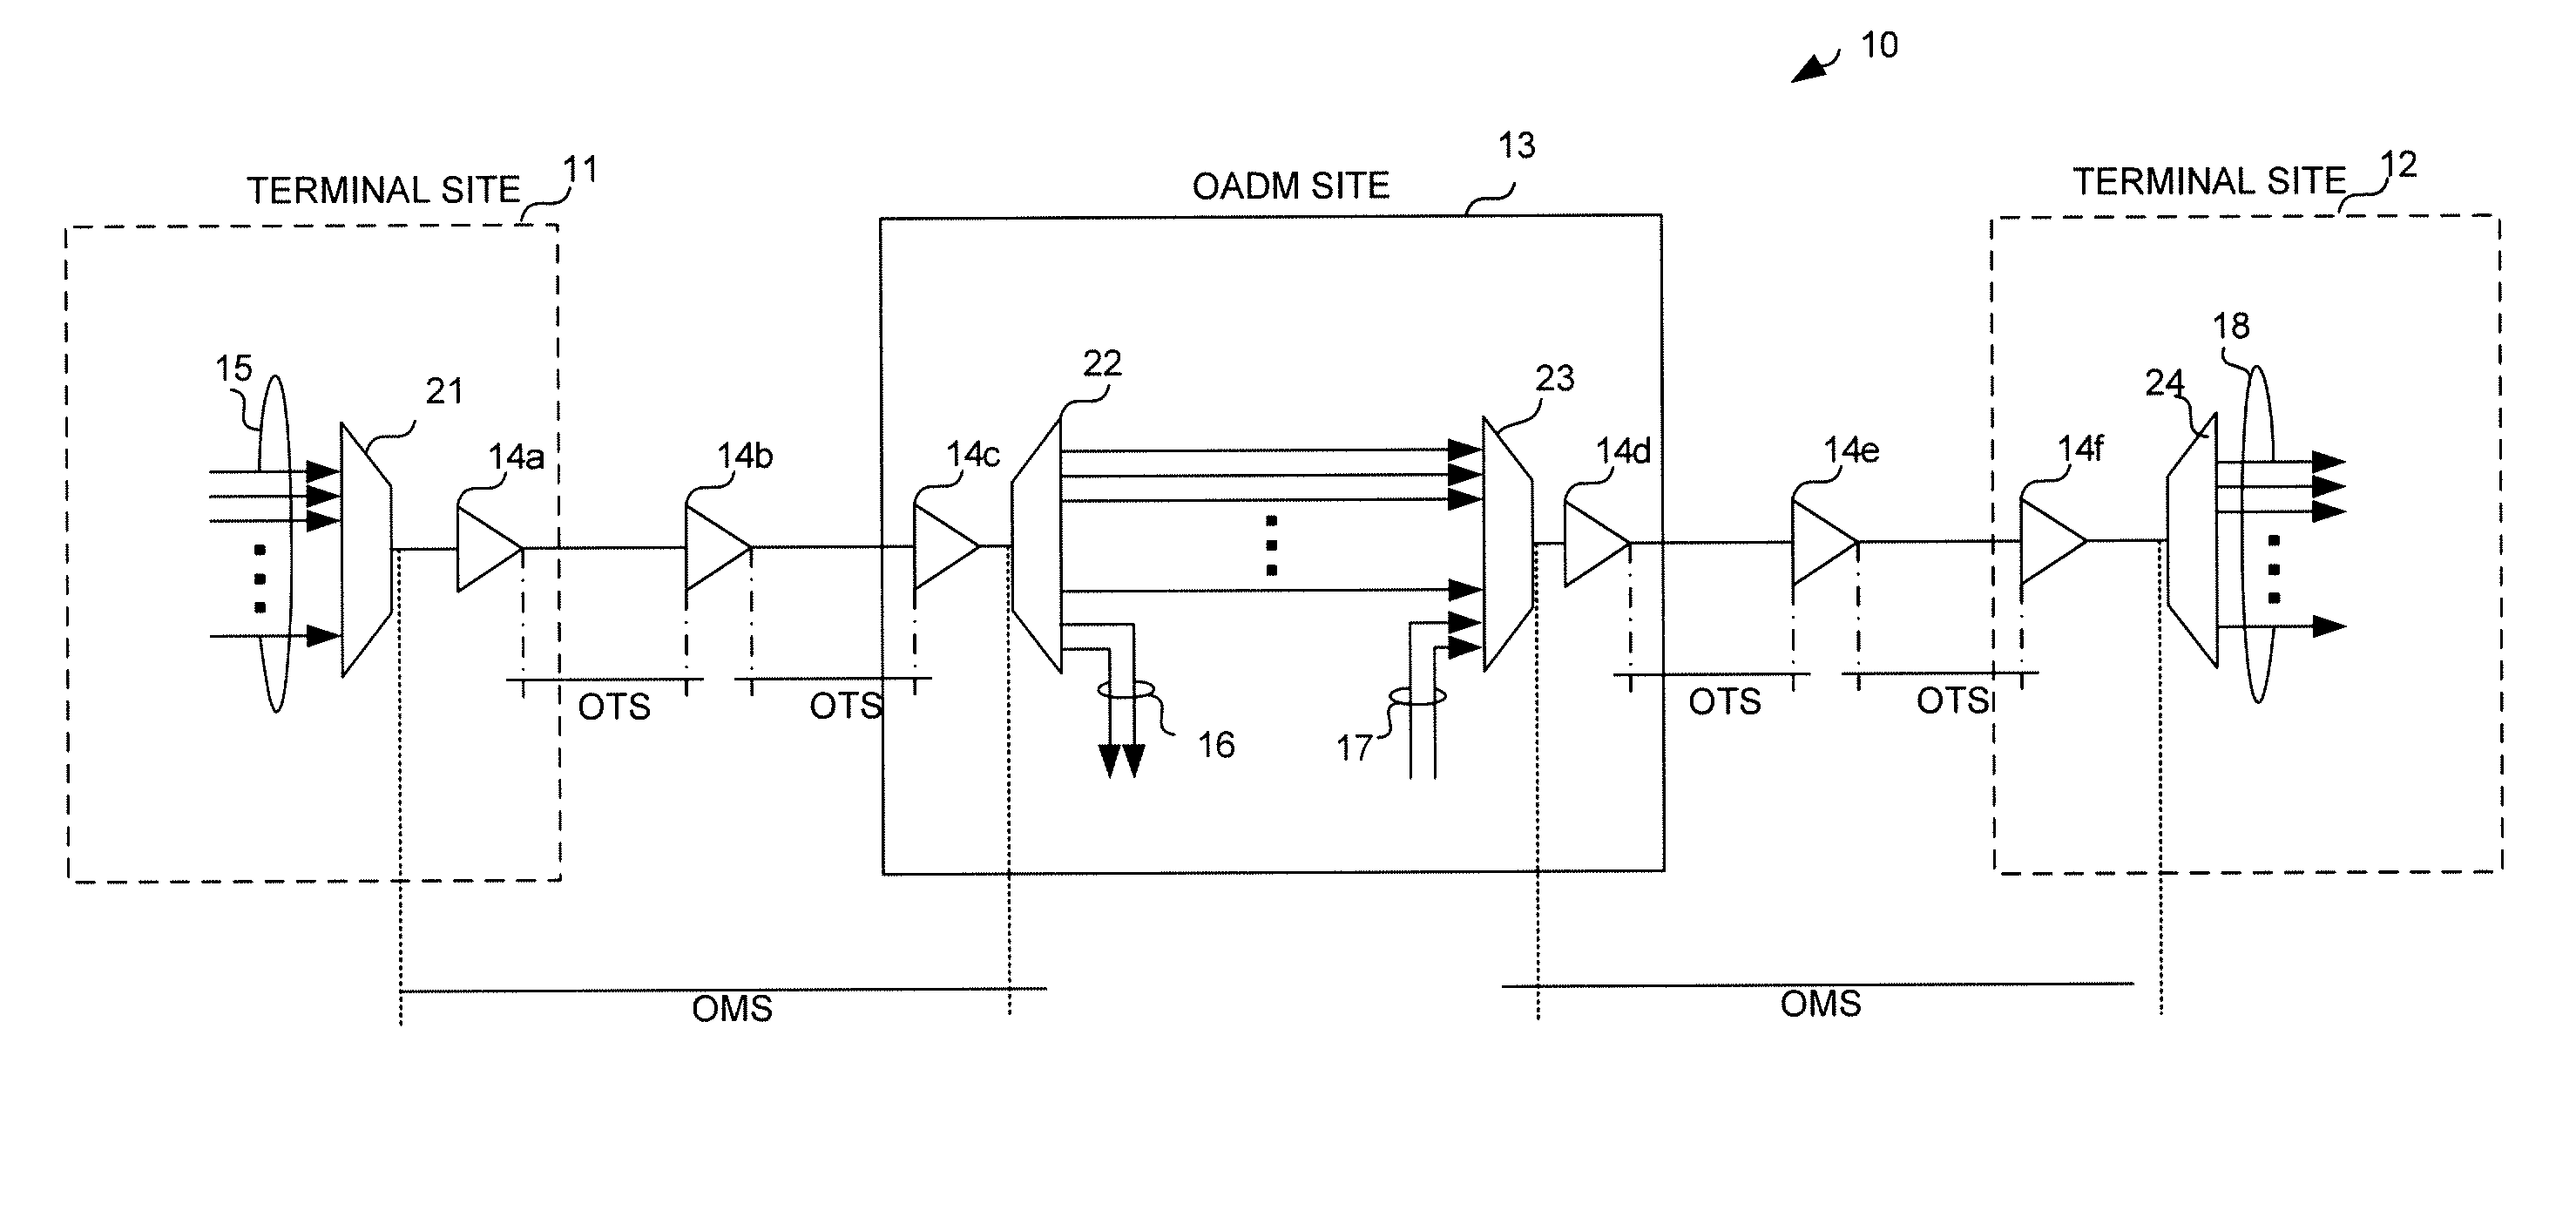 All optical 1+1 protection unit using sub-carrier modulation protocol